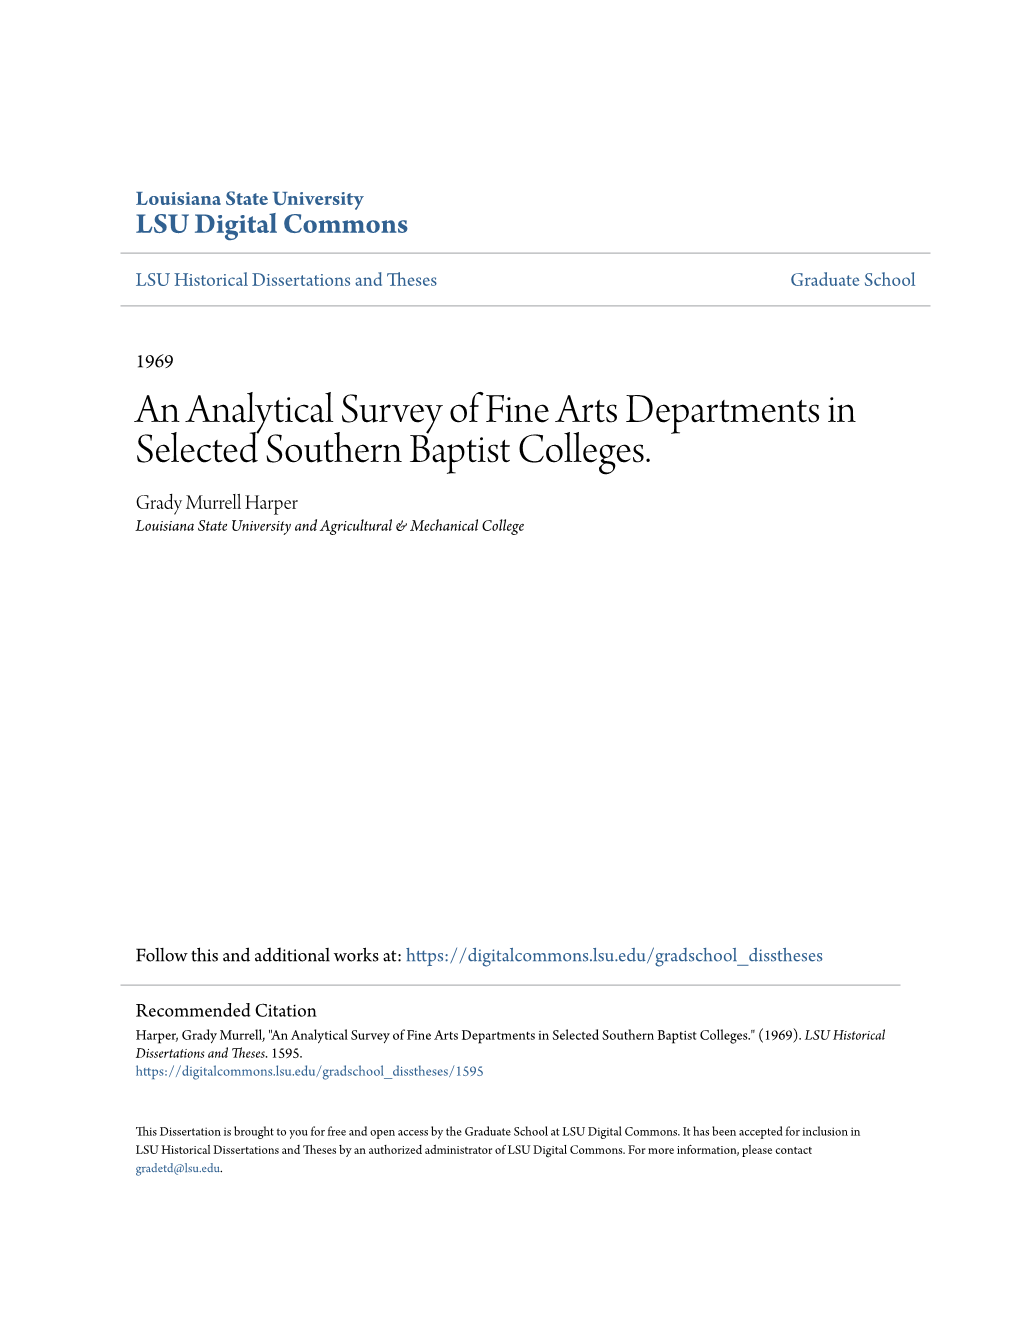 An Analytical Survey of Fine Arts Departments in Selected Southern Baptist Colleges